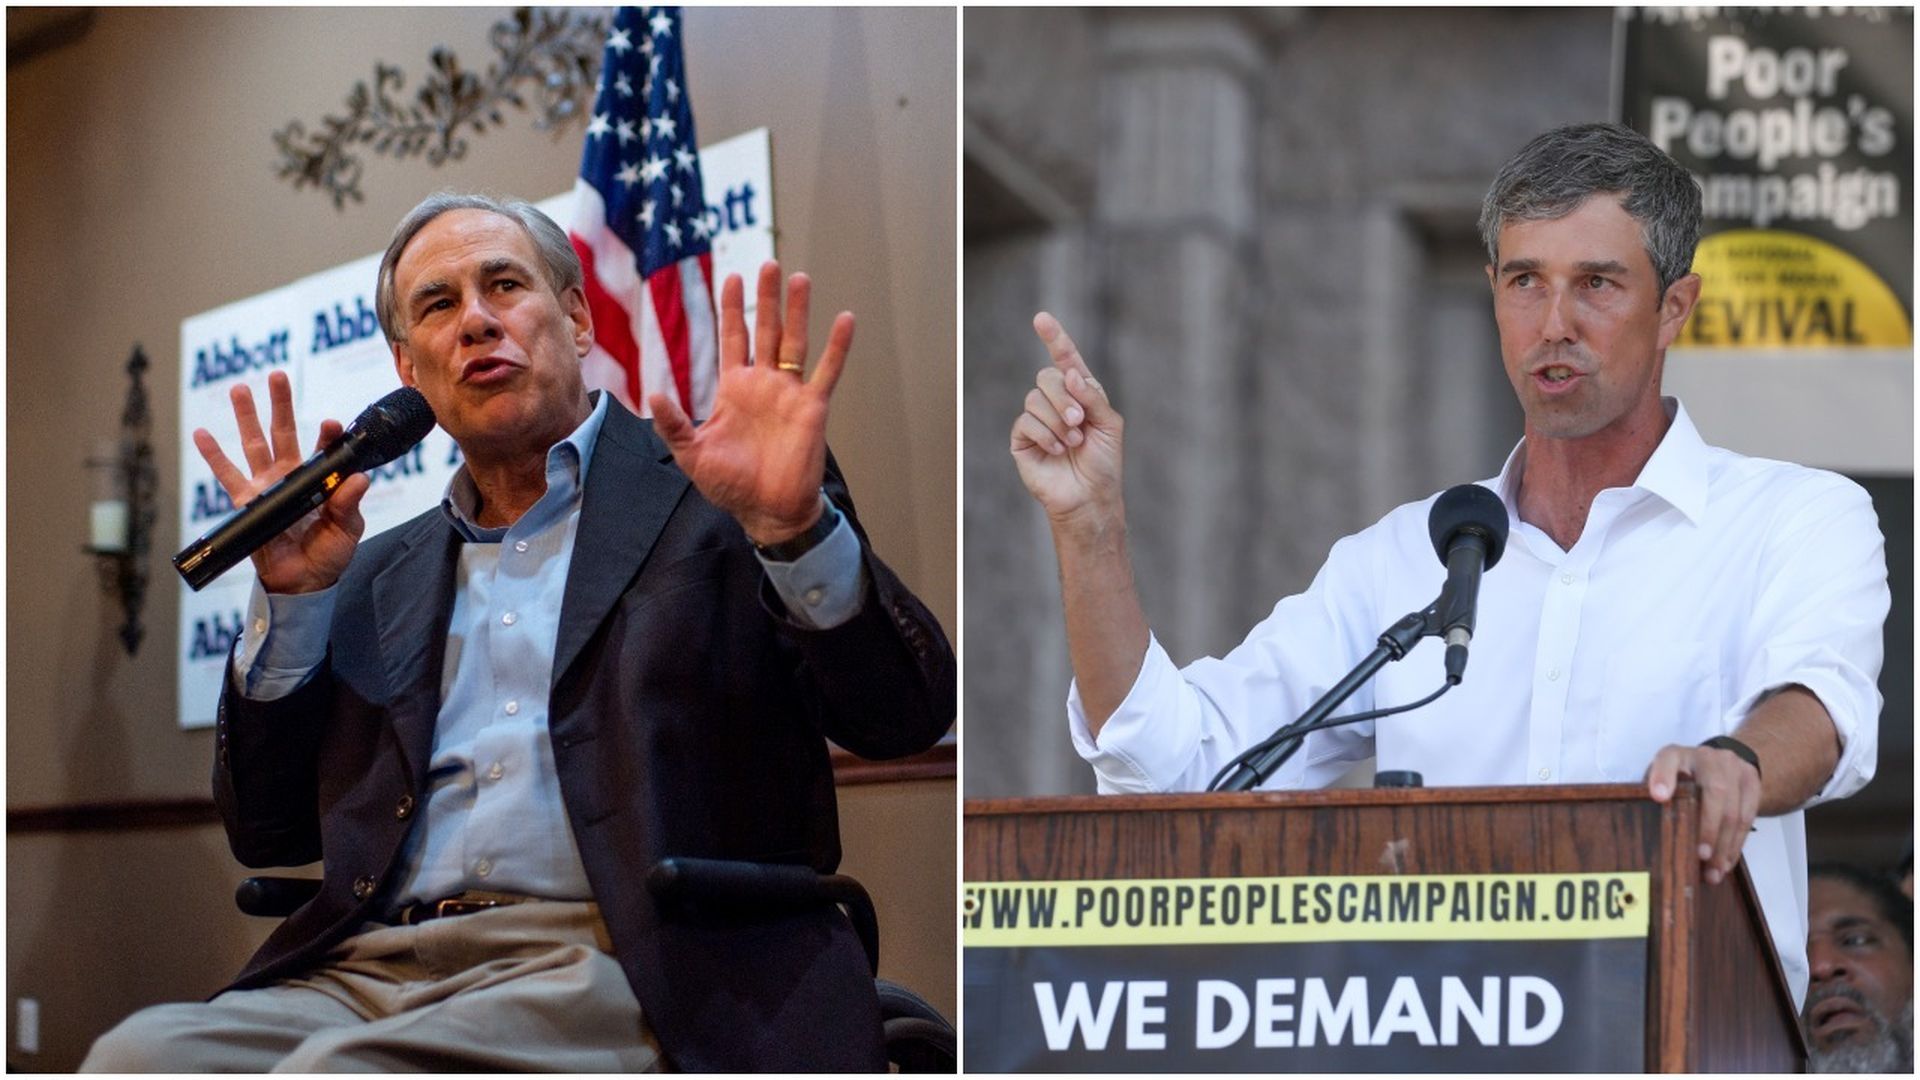 Combination images of Greg Abbott and Beto O'Rourke.